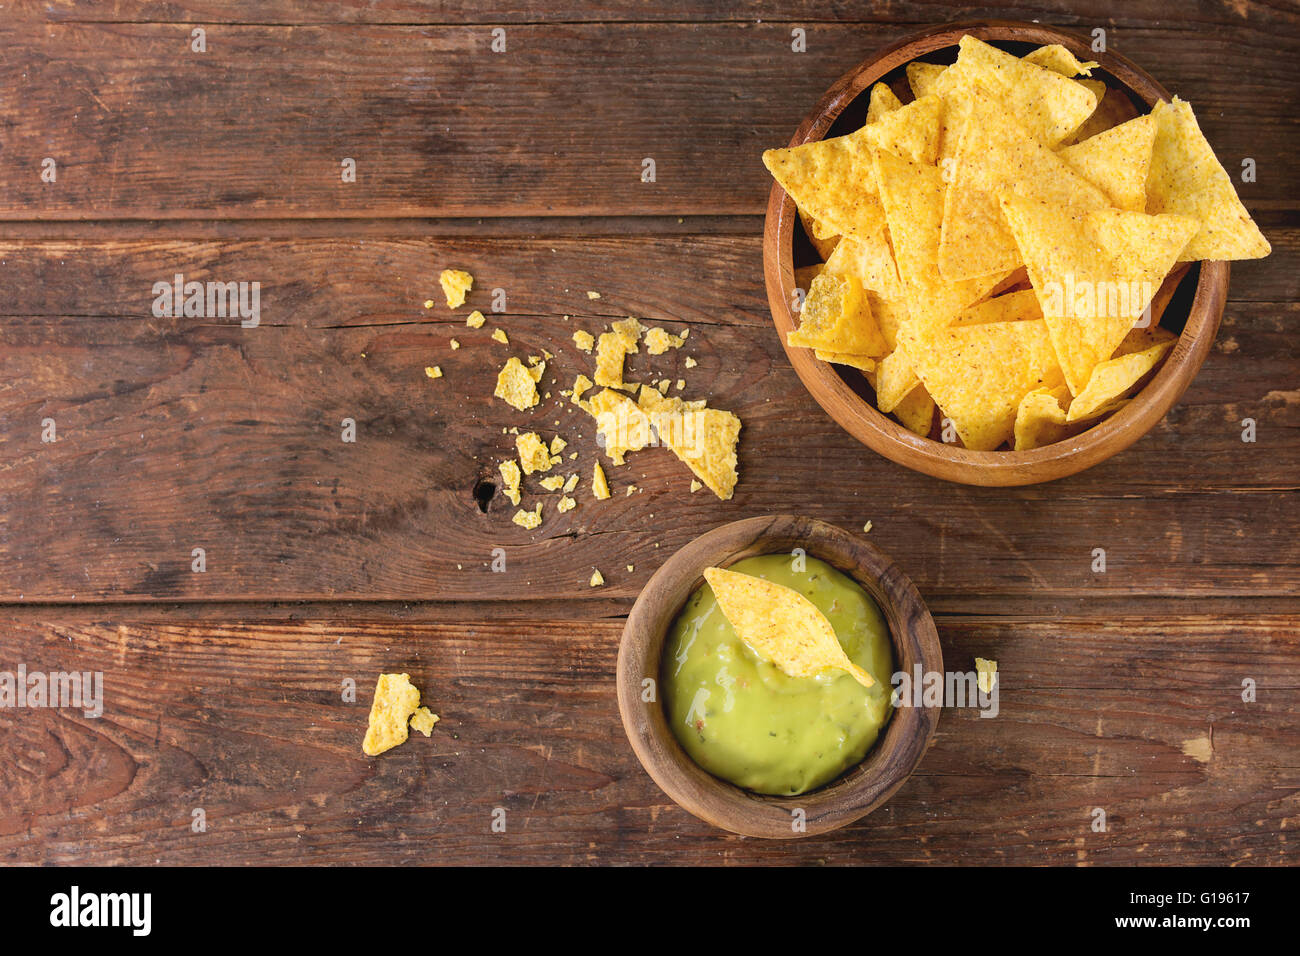 Mexican nachos chips Stock Photo